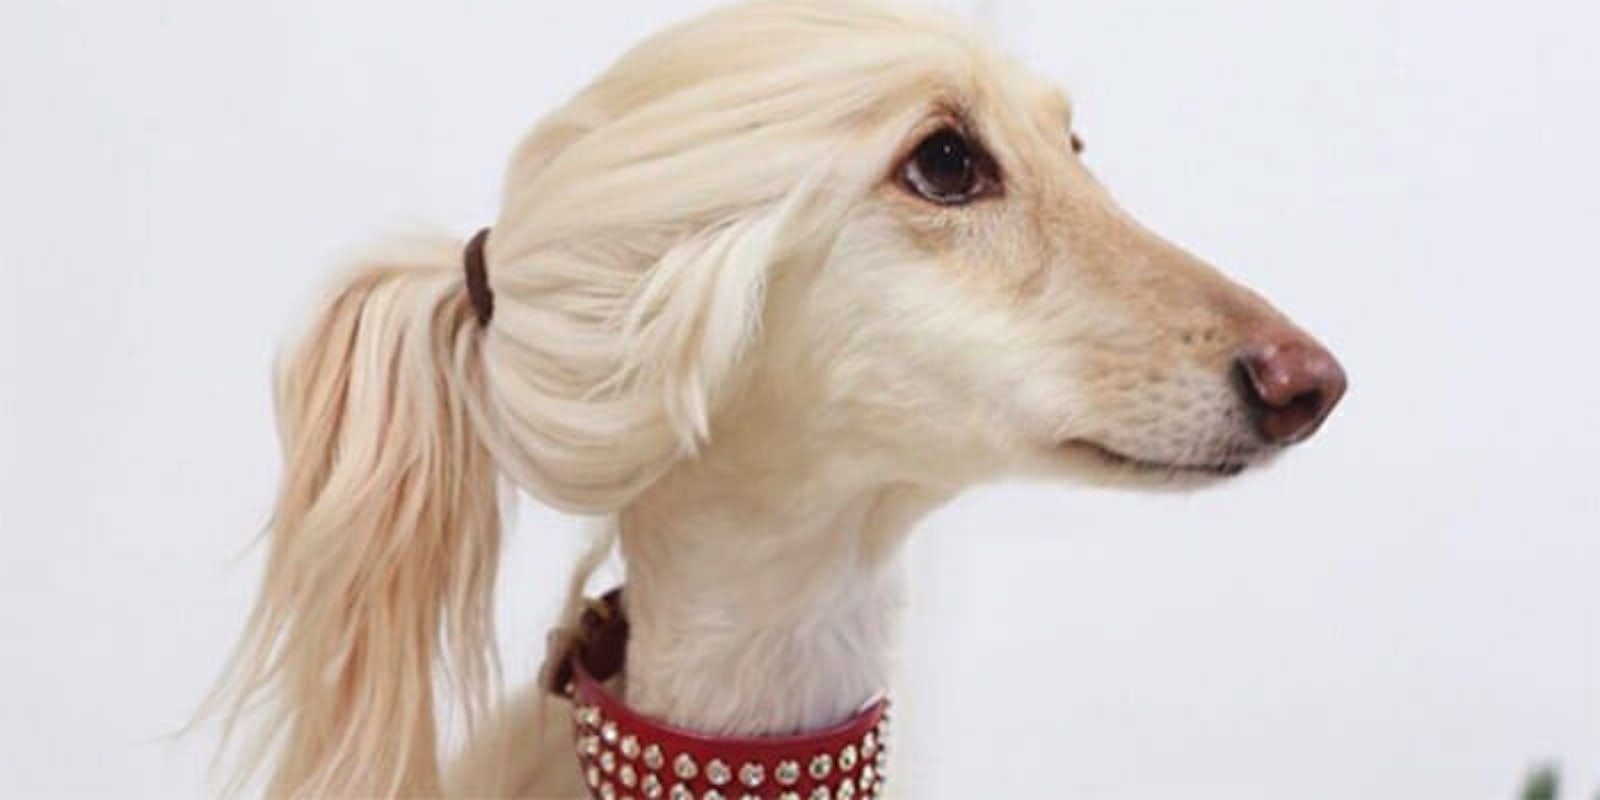 People think this beautiful dog looks like a blonde 'YouTube influencer.'